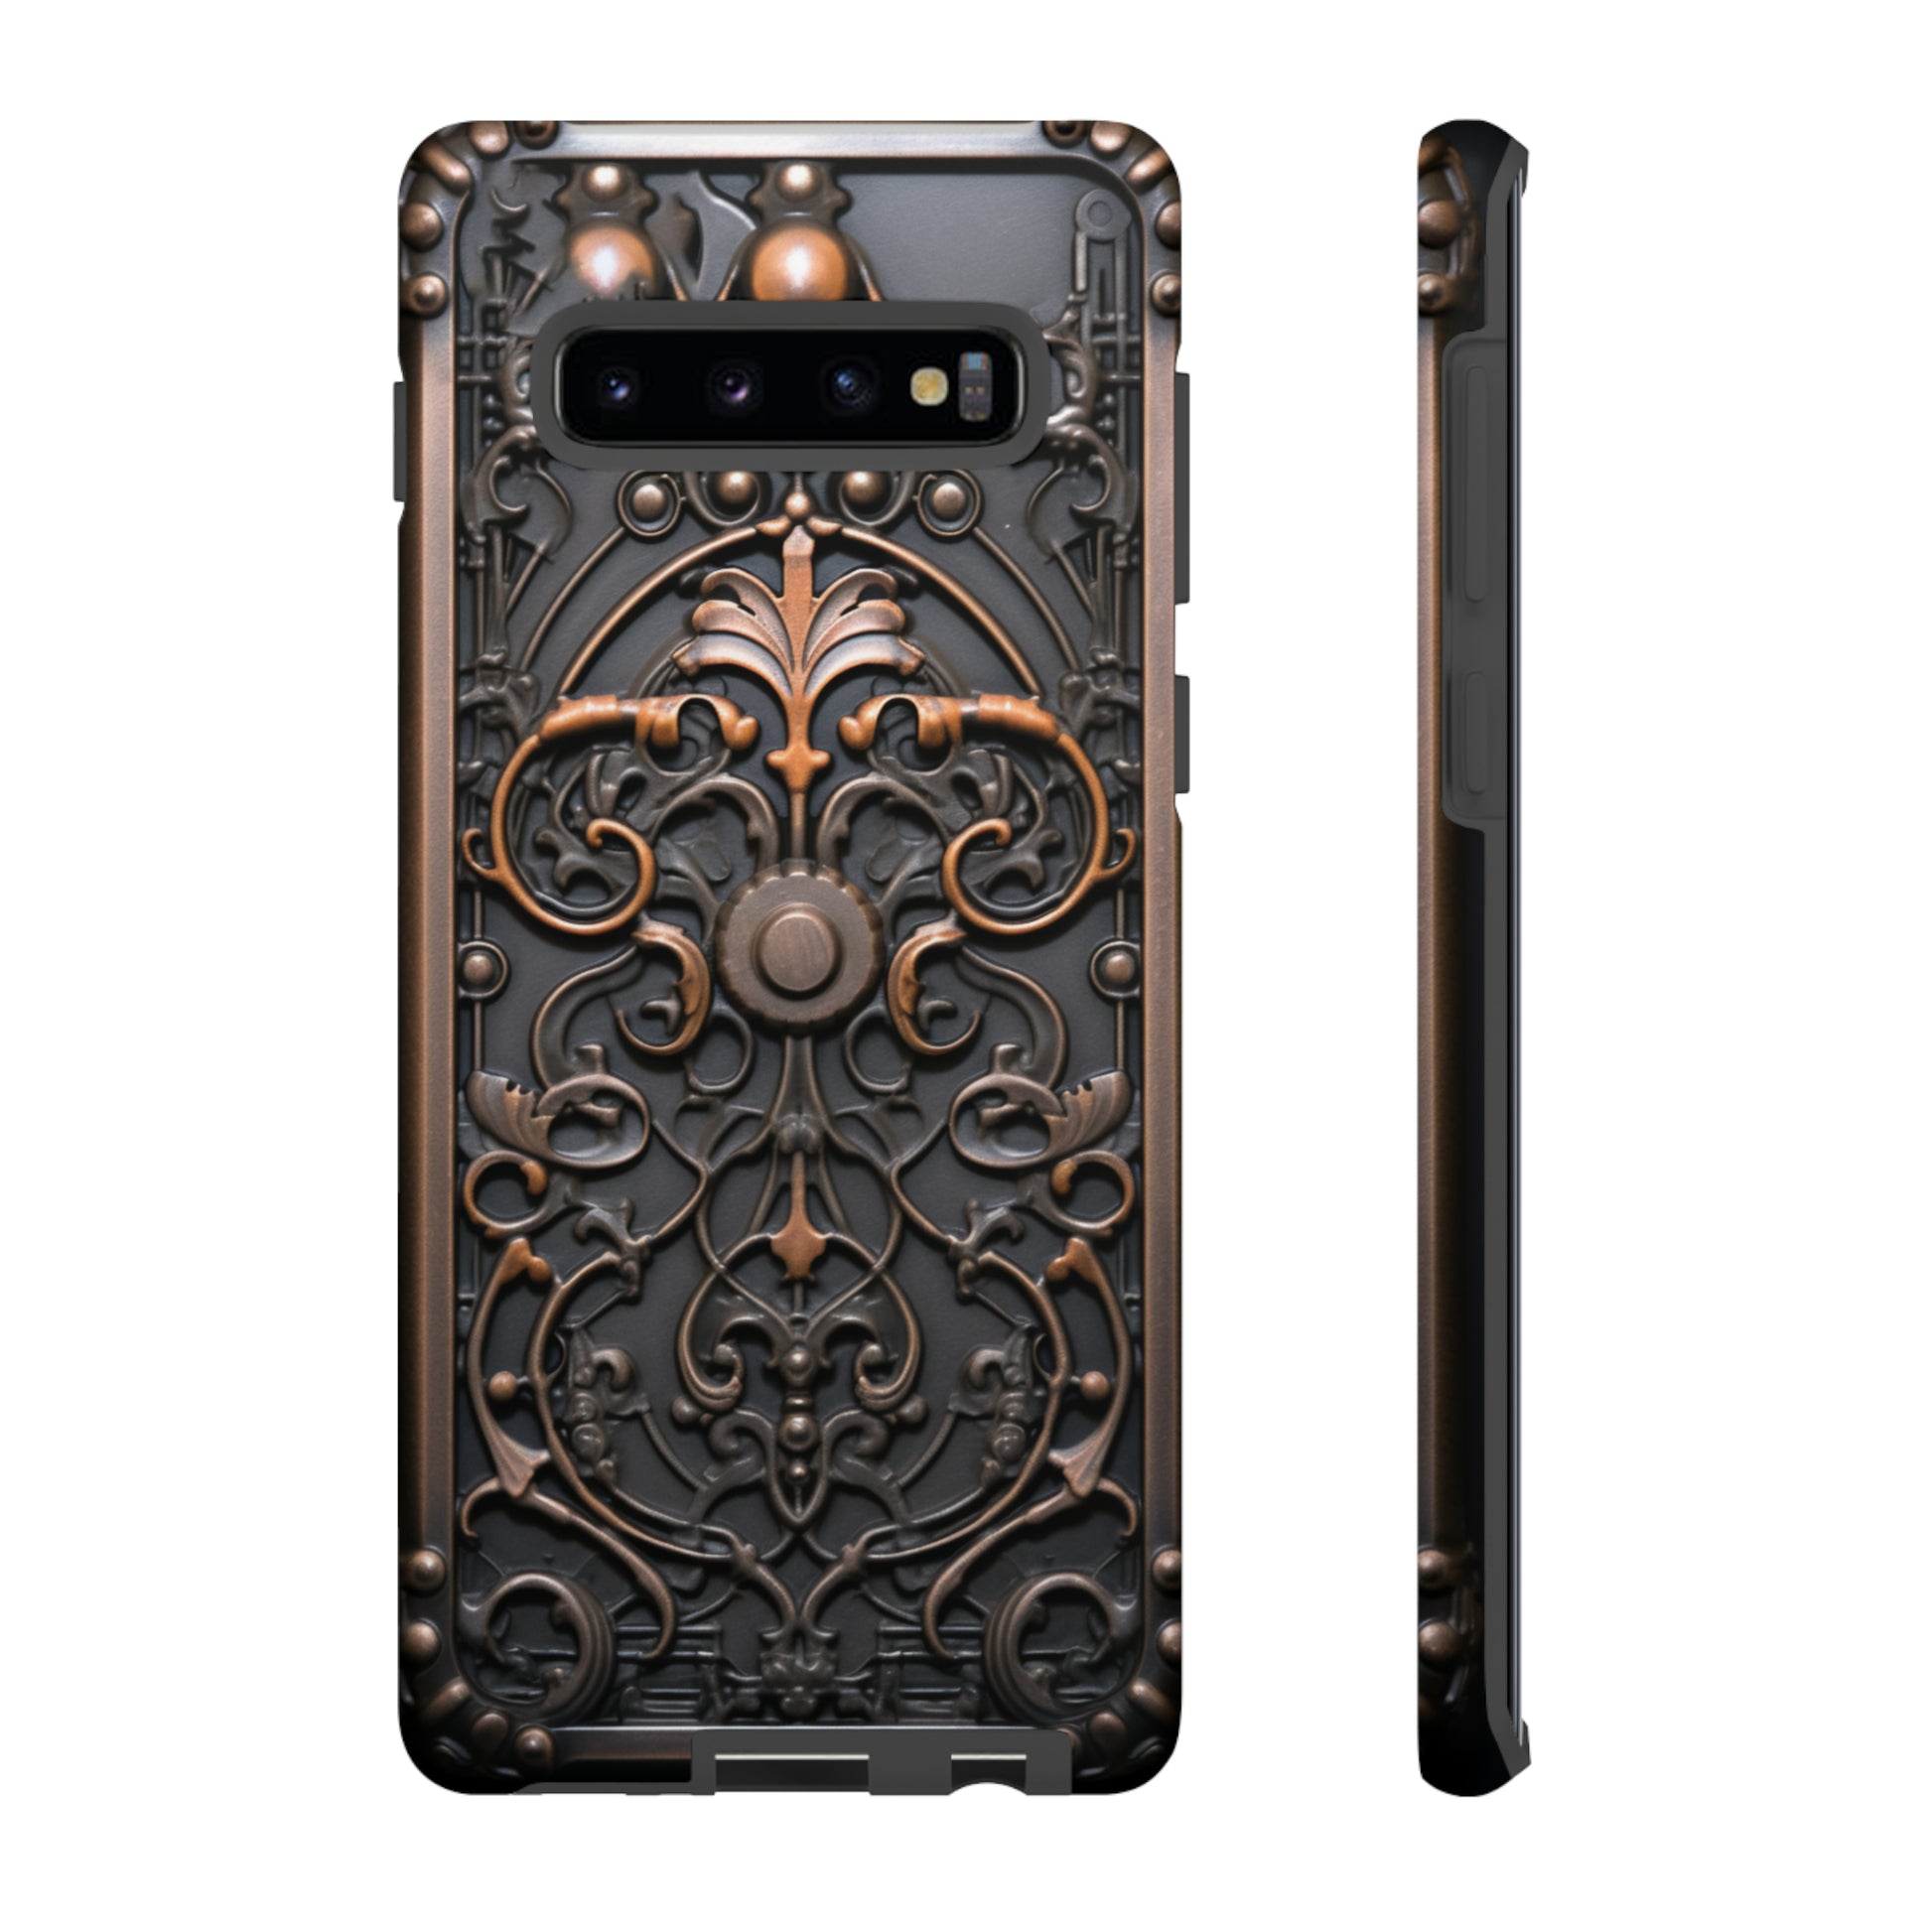 Spanish wrought iron art cover for iPhone 12